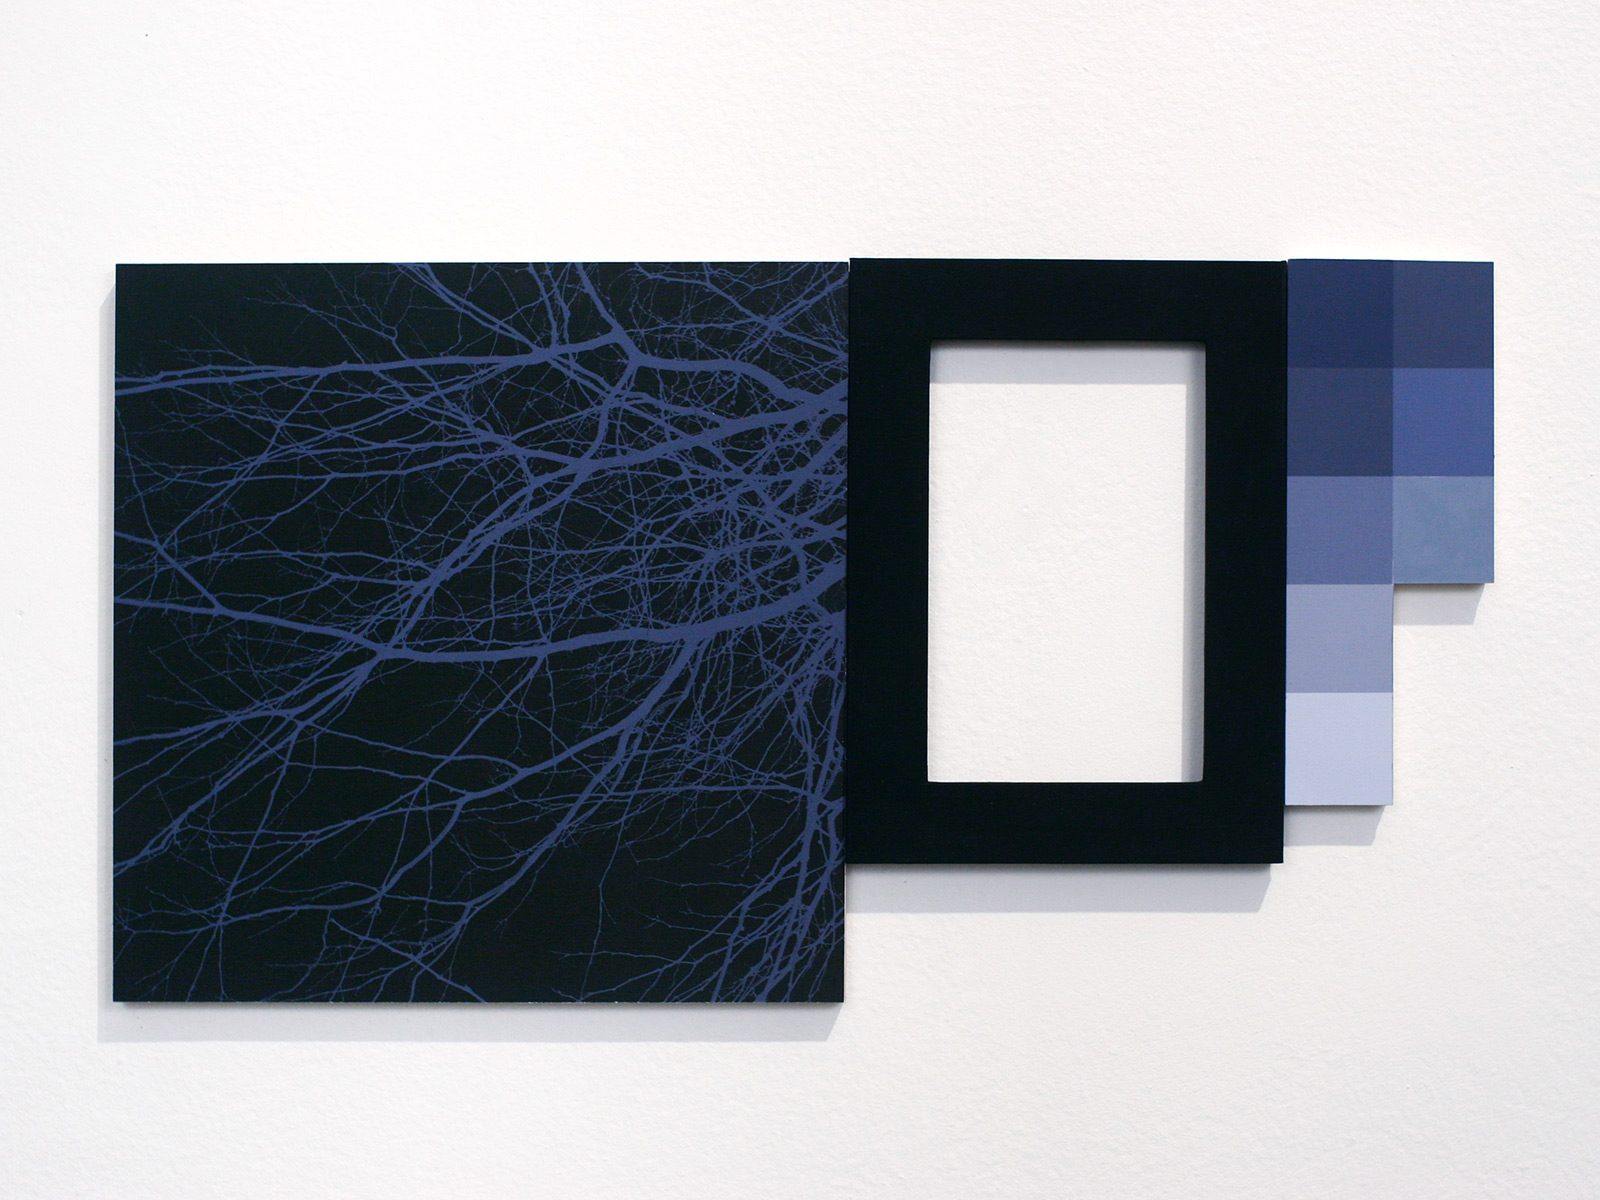 Square Root 2. Flashe, gouache, archival pigment print, frame, wood. 2014.